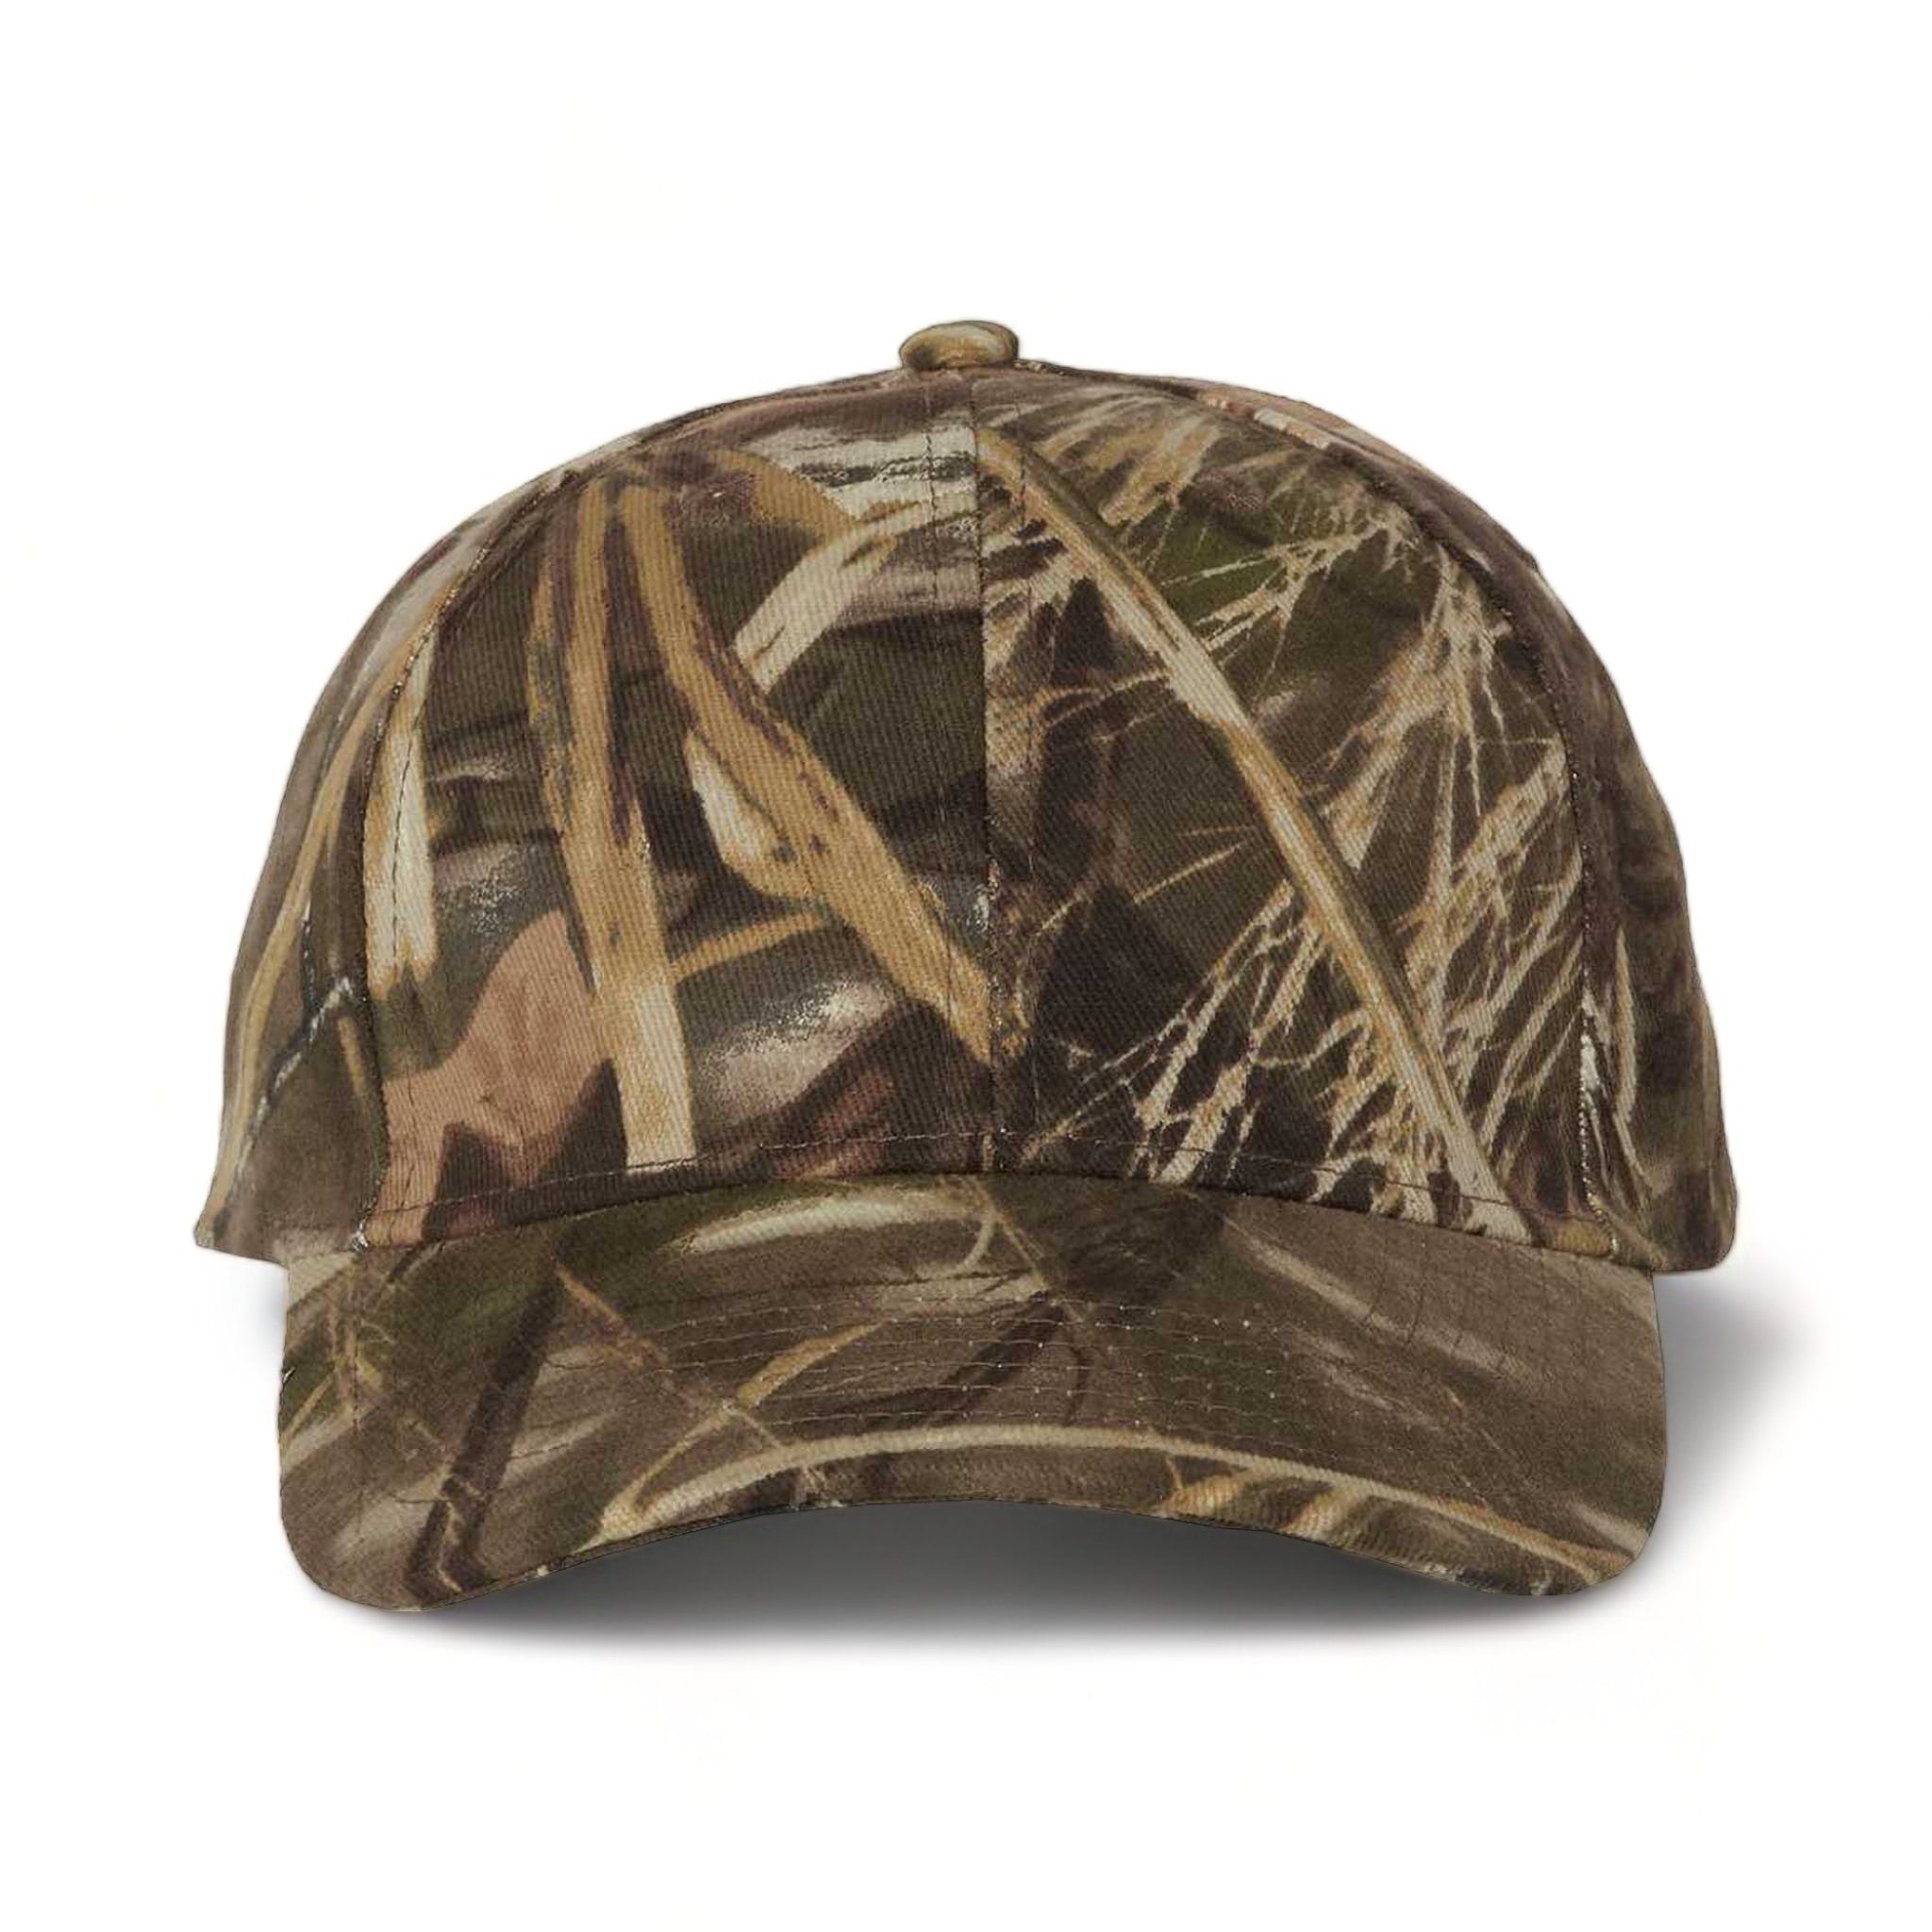 Front view of Kati LC10 custom hat in realtree max4